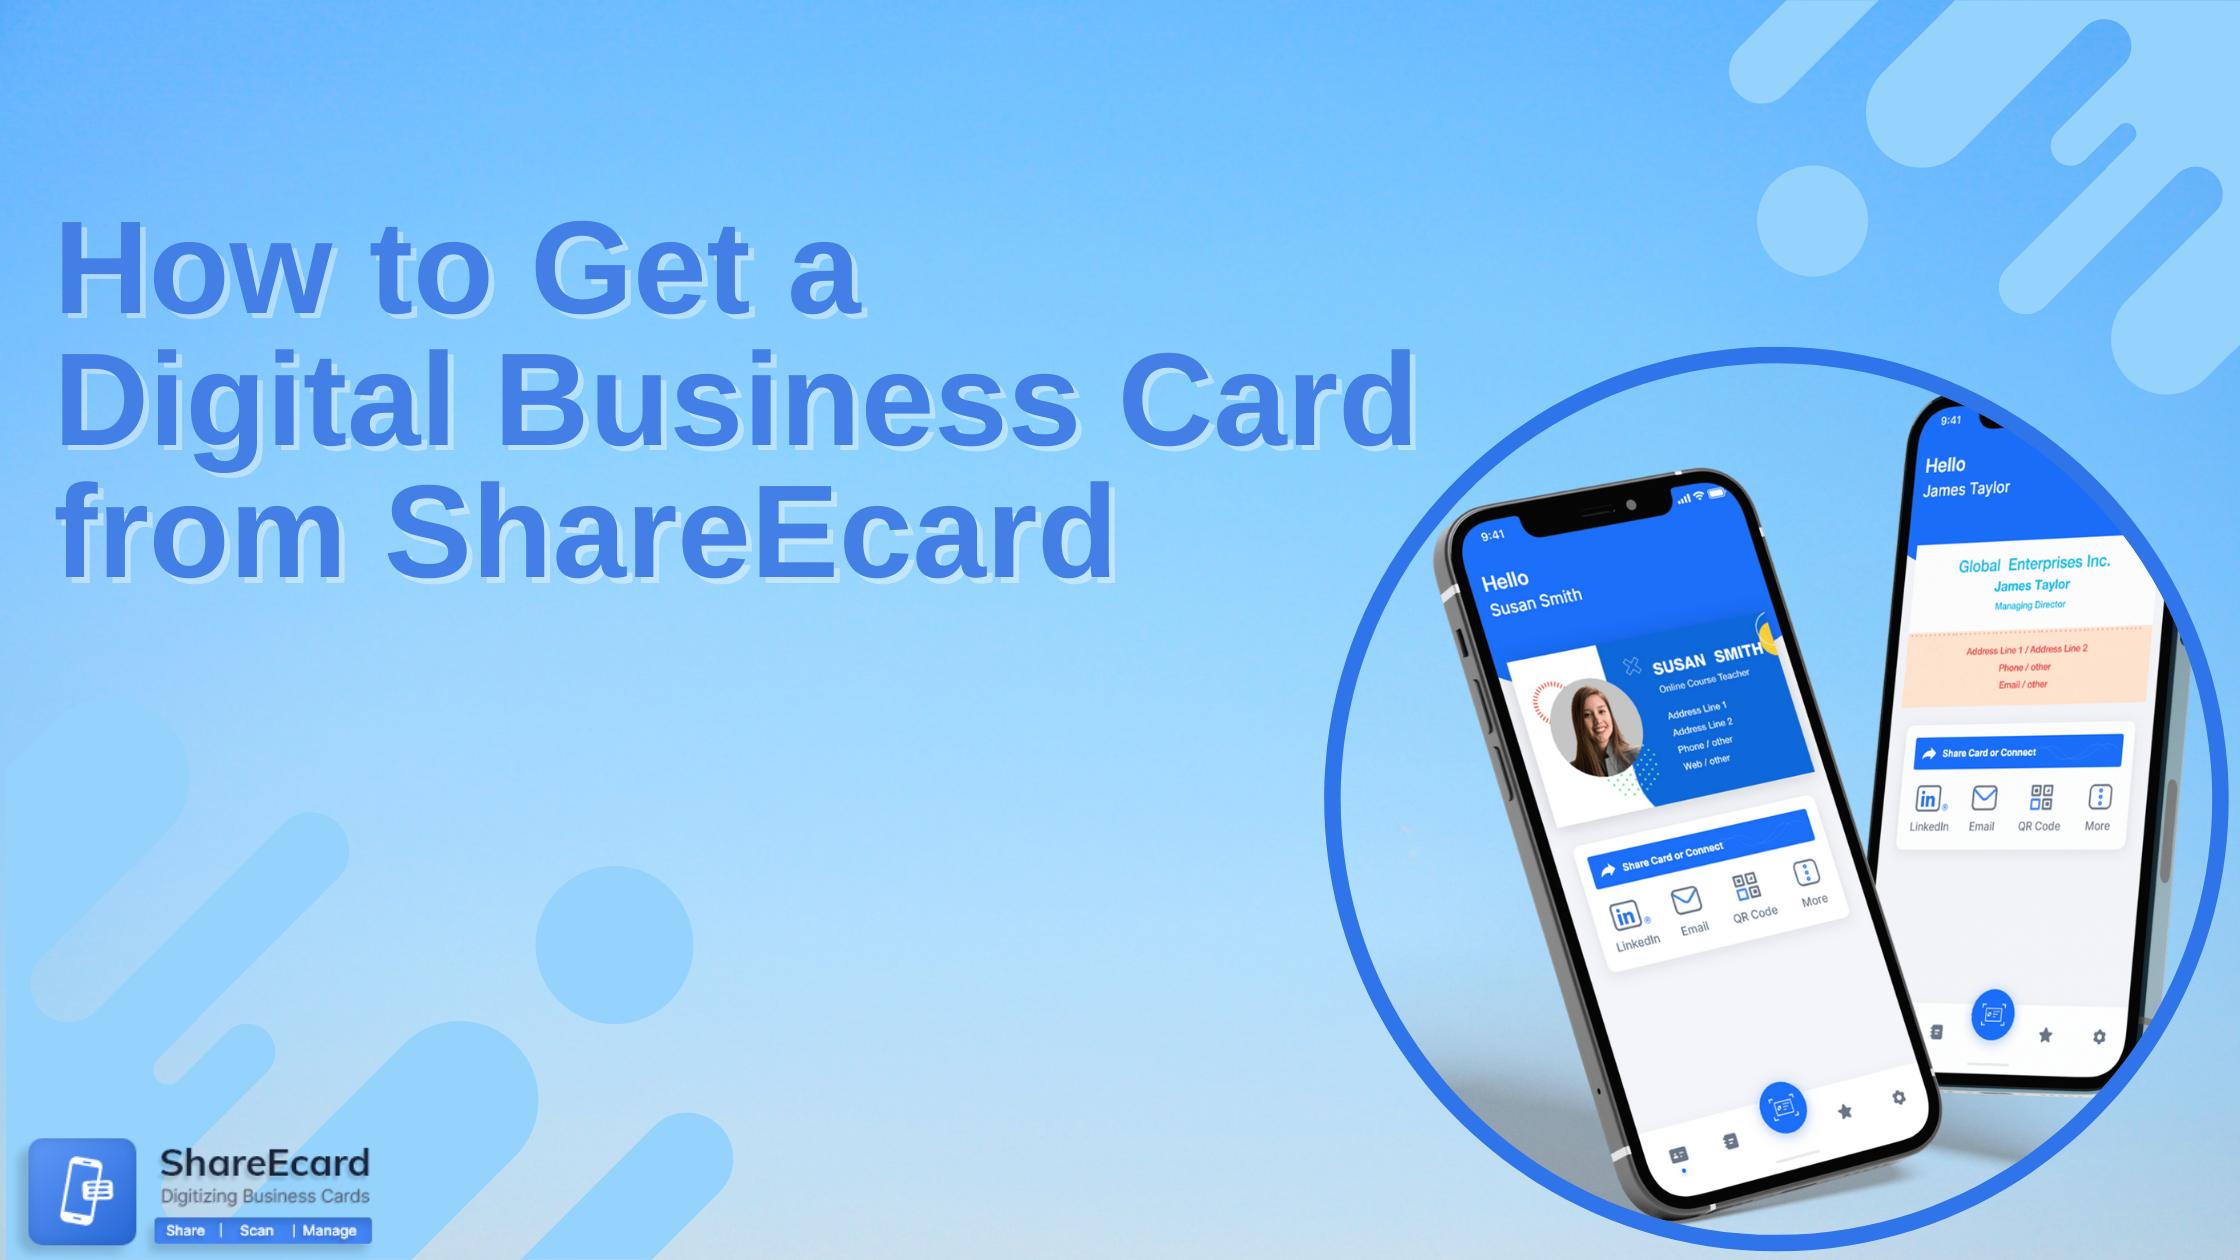 How to Digitize Business Cards with ShareEcard